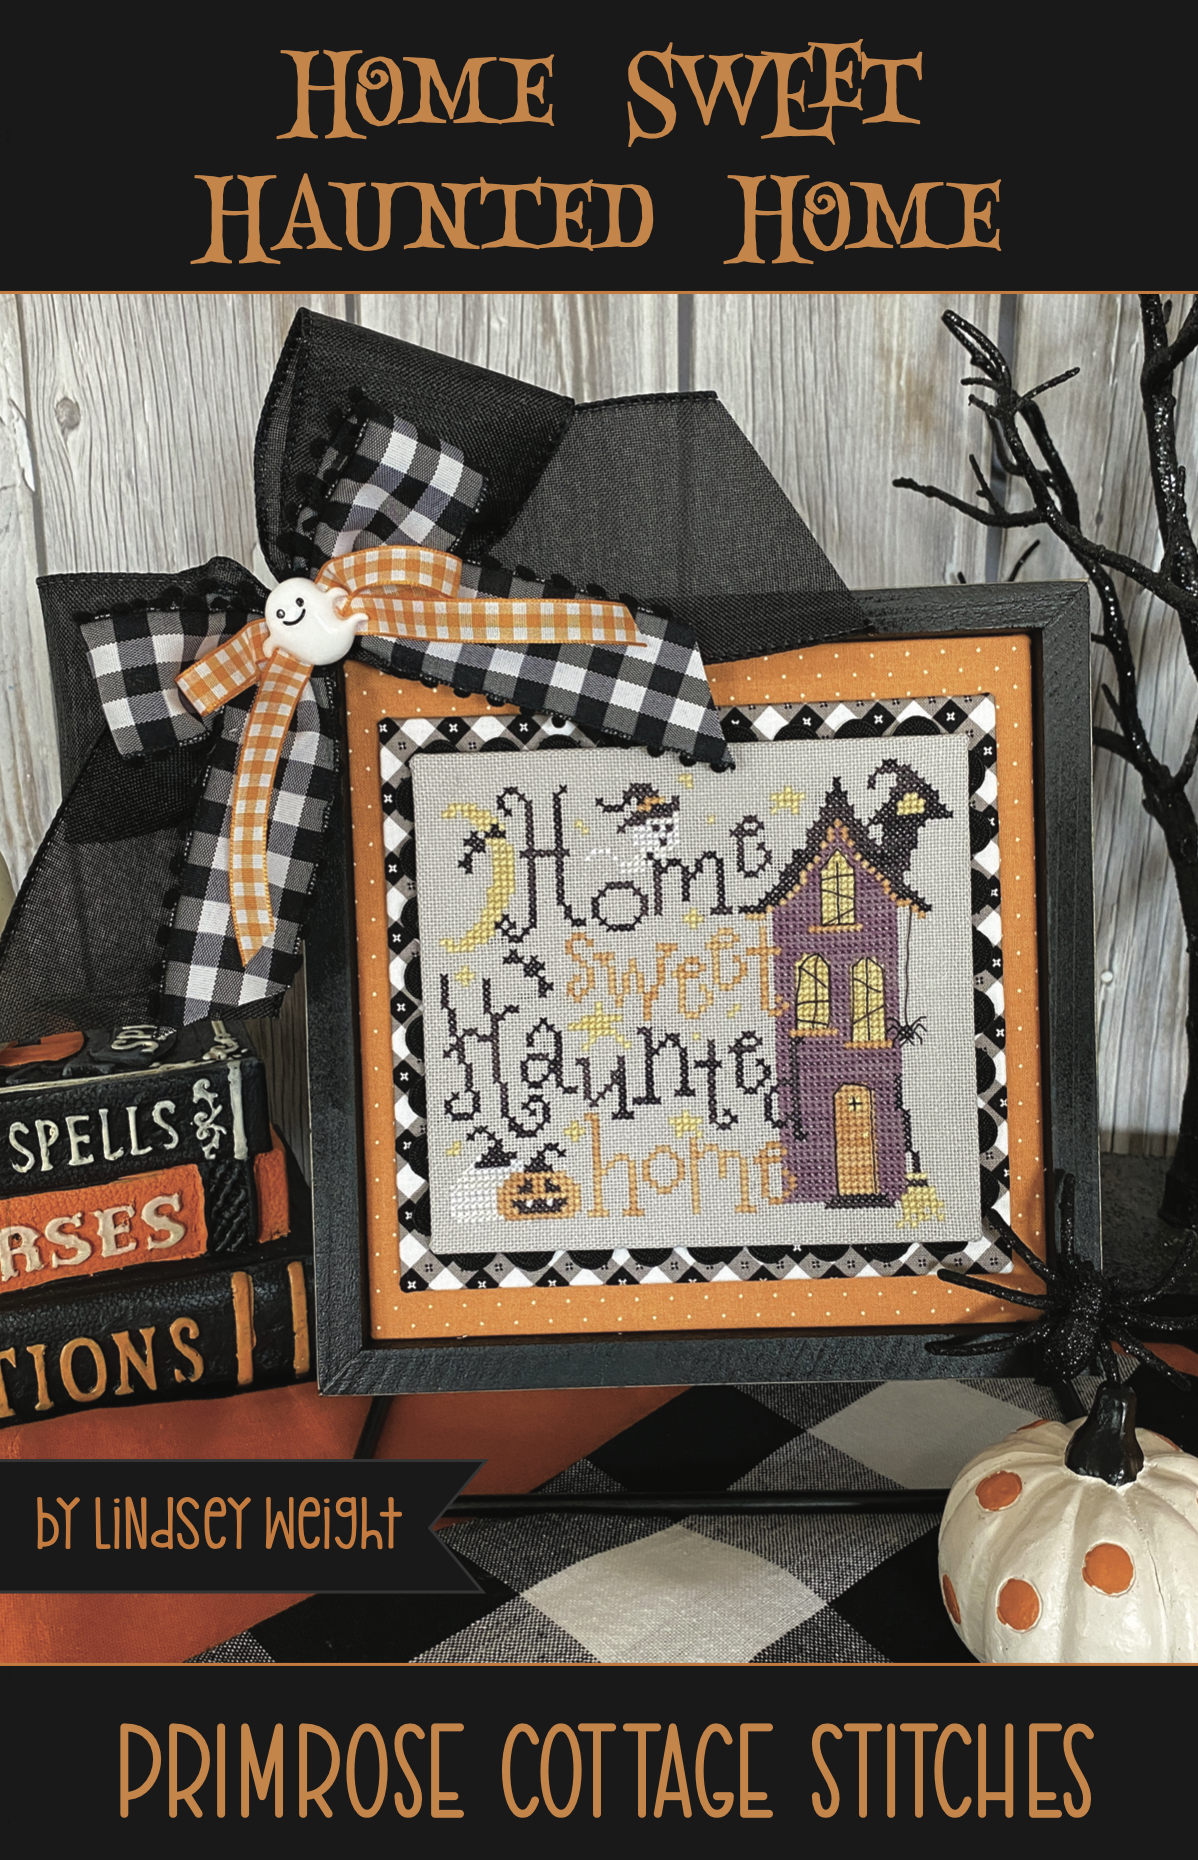 Home Sweet Haunted Home by Primrose Cottage Stitches